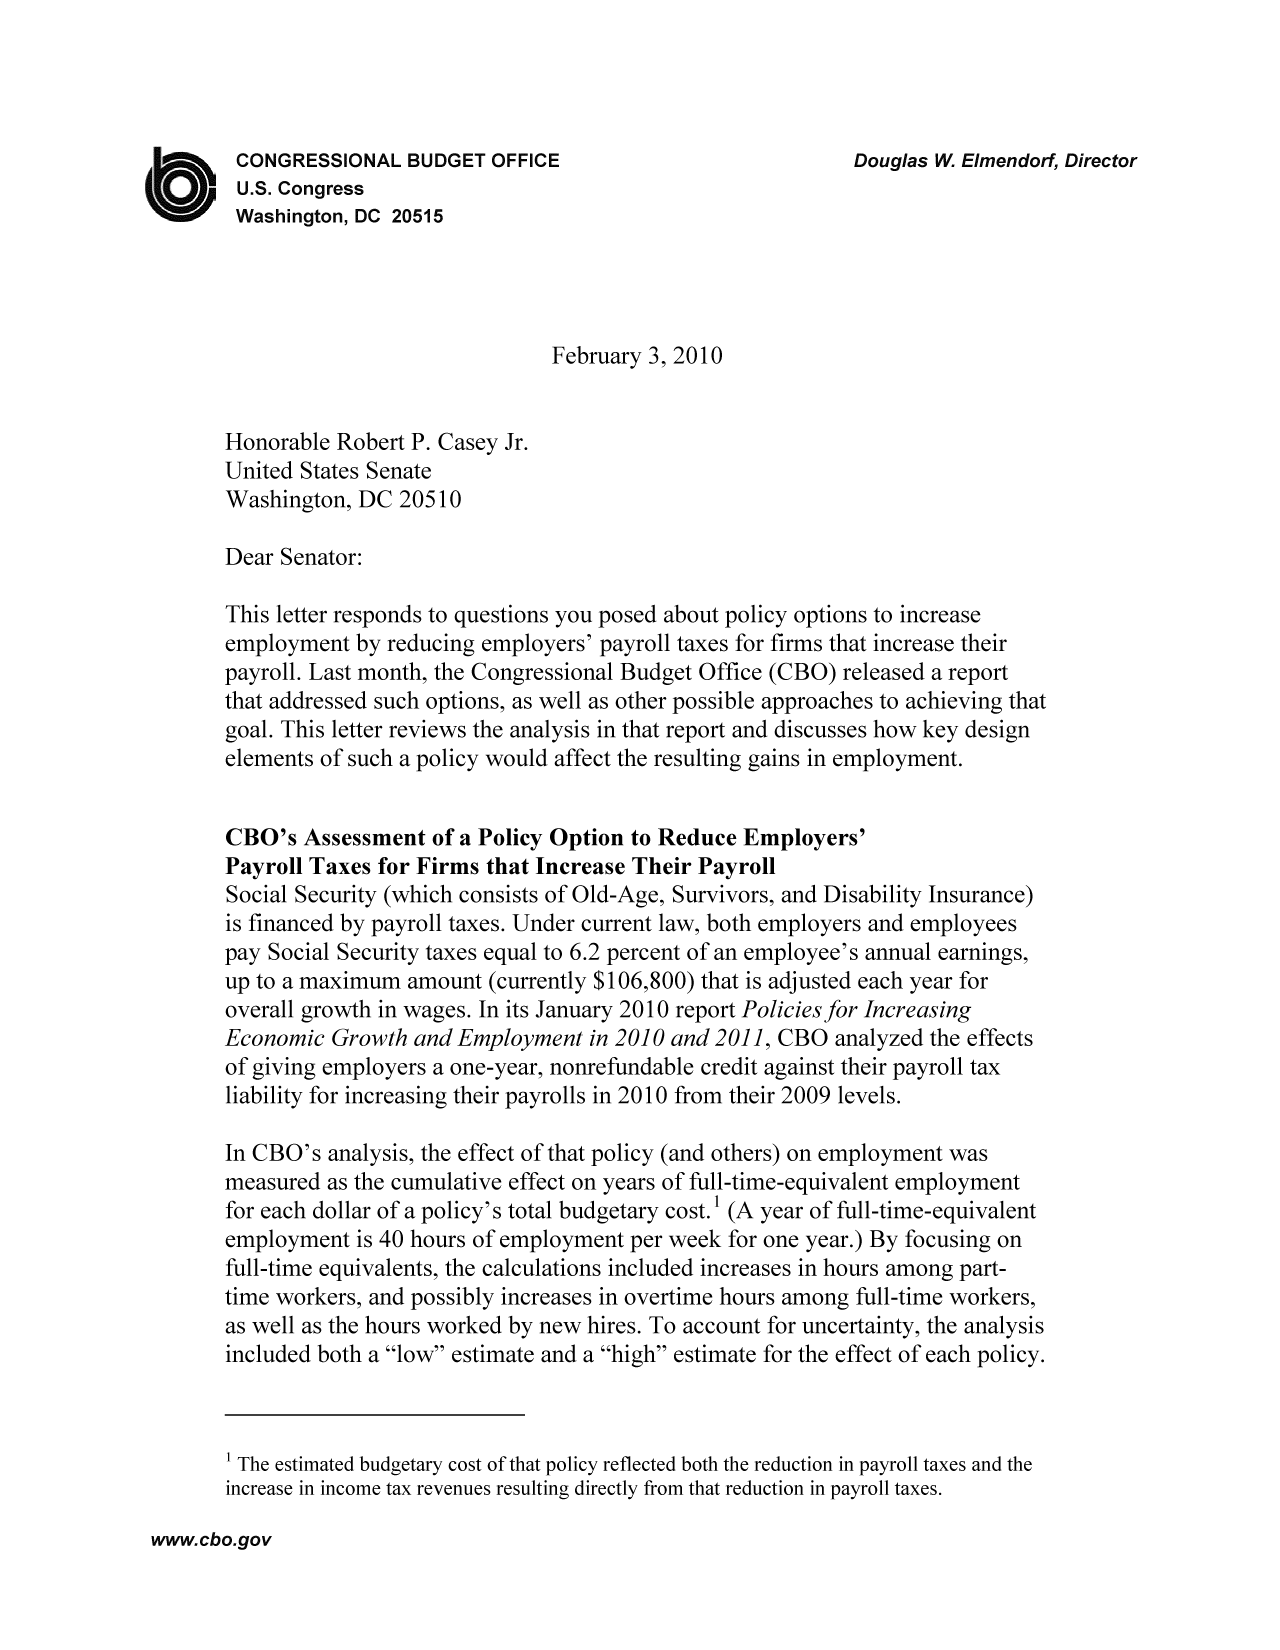 handle is hein.congrec/cbo9590 and id is 1 raw text is: CONGRESSIONAL BUDGET OFFICE                               Douglas W. Elmendorf, Director
U.S. Congress
Washington, DC 20515
February 3, 2010
Honorable Robert P. Casey Jr.
United States Senate
Washington, DC 20510
Dear Senator:
This letter responds to questions you posed about policy options to increase
employment by reducing employers' payroll taxes for firms that increase their
payroll. Last month, the Congressional Budget Office (CBO) released a report
that addressed such options, as well as other possible approaches to achieving that
goal. This letter reviews the analysis in that report and discusses how key design
elements of such a policy would affect the resulting gains in employment.
CBO's Assessment of a Policy Option to Reduce Employers'
Payroll Taxes for Firms that Increase Their Payroll
Social Security (which consists of Old-Age, Survivors, and Disability Insurance)
is financed by payroll taxes. Under current law, both employers and employees
pay Social Security taxes equal to 6.2 percent of an employee's annual earnings,
up to a maximum amount (currently $106,800) that is adjusted each year for
overall growth in wages. In its January 2010 report Policies for Increasing
Economic Growth and Employment in 2010 and 2011, CBO analyzed the effects
of giving employers a one-year, nonrefundable credit against their payroll tax
liability for increasing their payrolls in 2010 from their 2009 levels.
In CBO's analysis, the effect of that policy (and others) on employment was
measured as the cumulative effect on years of full-time-equivalent employment
for each dollar of a policy's total budgetary cost. (A year of full-time-equivalent
employment is 40 hours of employment per week for one year.) By focusing on
full-time equivalents, the calculations included increases in hours among part-
time workers, and possibly increases in overtime hours among full-time workers,
as well as the hours worked by new hires. To account for uncertainty, the analysis
included both a low estimate and a high estimate for the effect of each policy.
' The estimated budgetary cost of that policy reflected both the reduction in payroll taxes and the
increase in income tax revenues resulting directly from that reduction in payroll taxes.

www.cbo.gov


